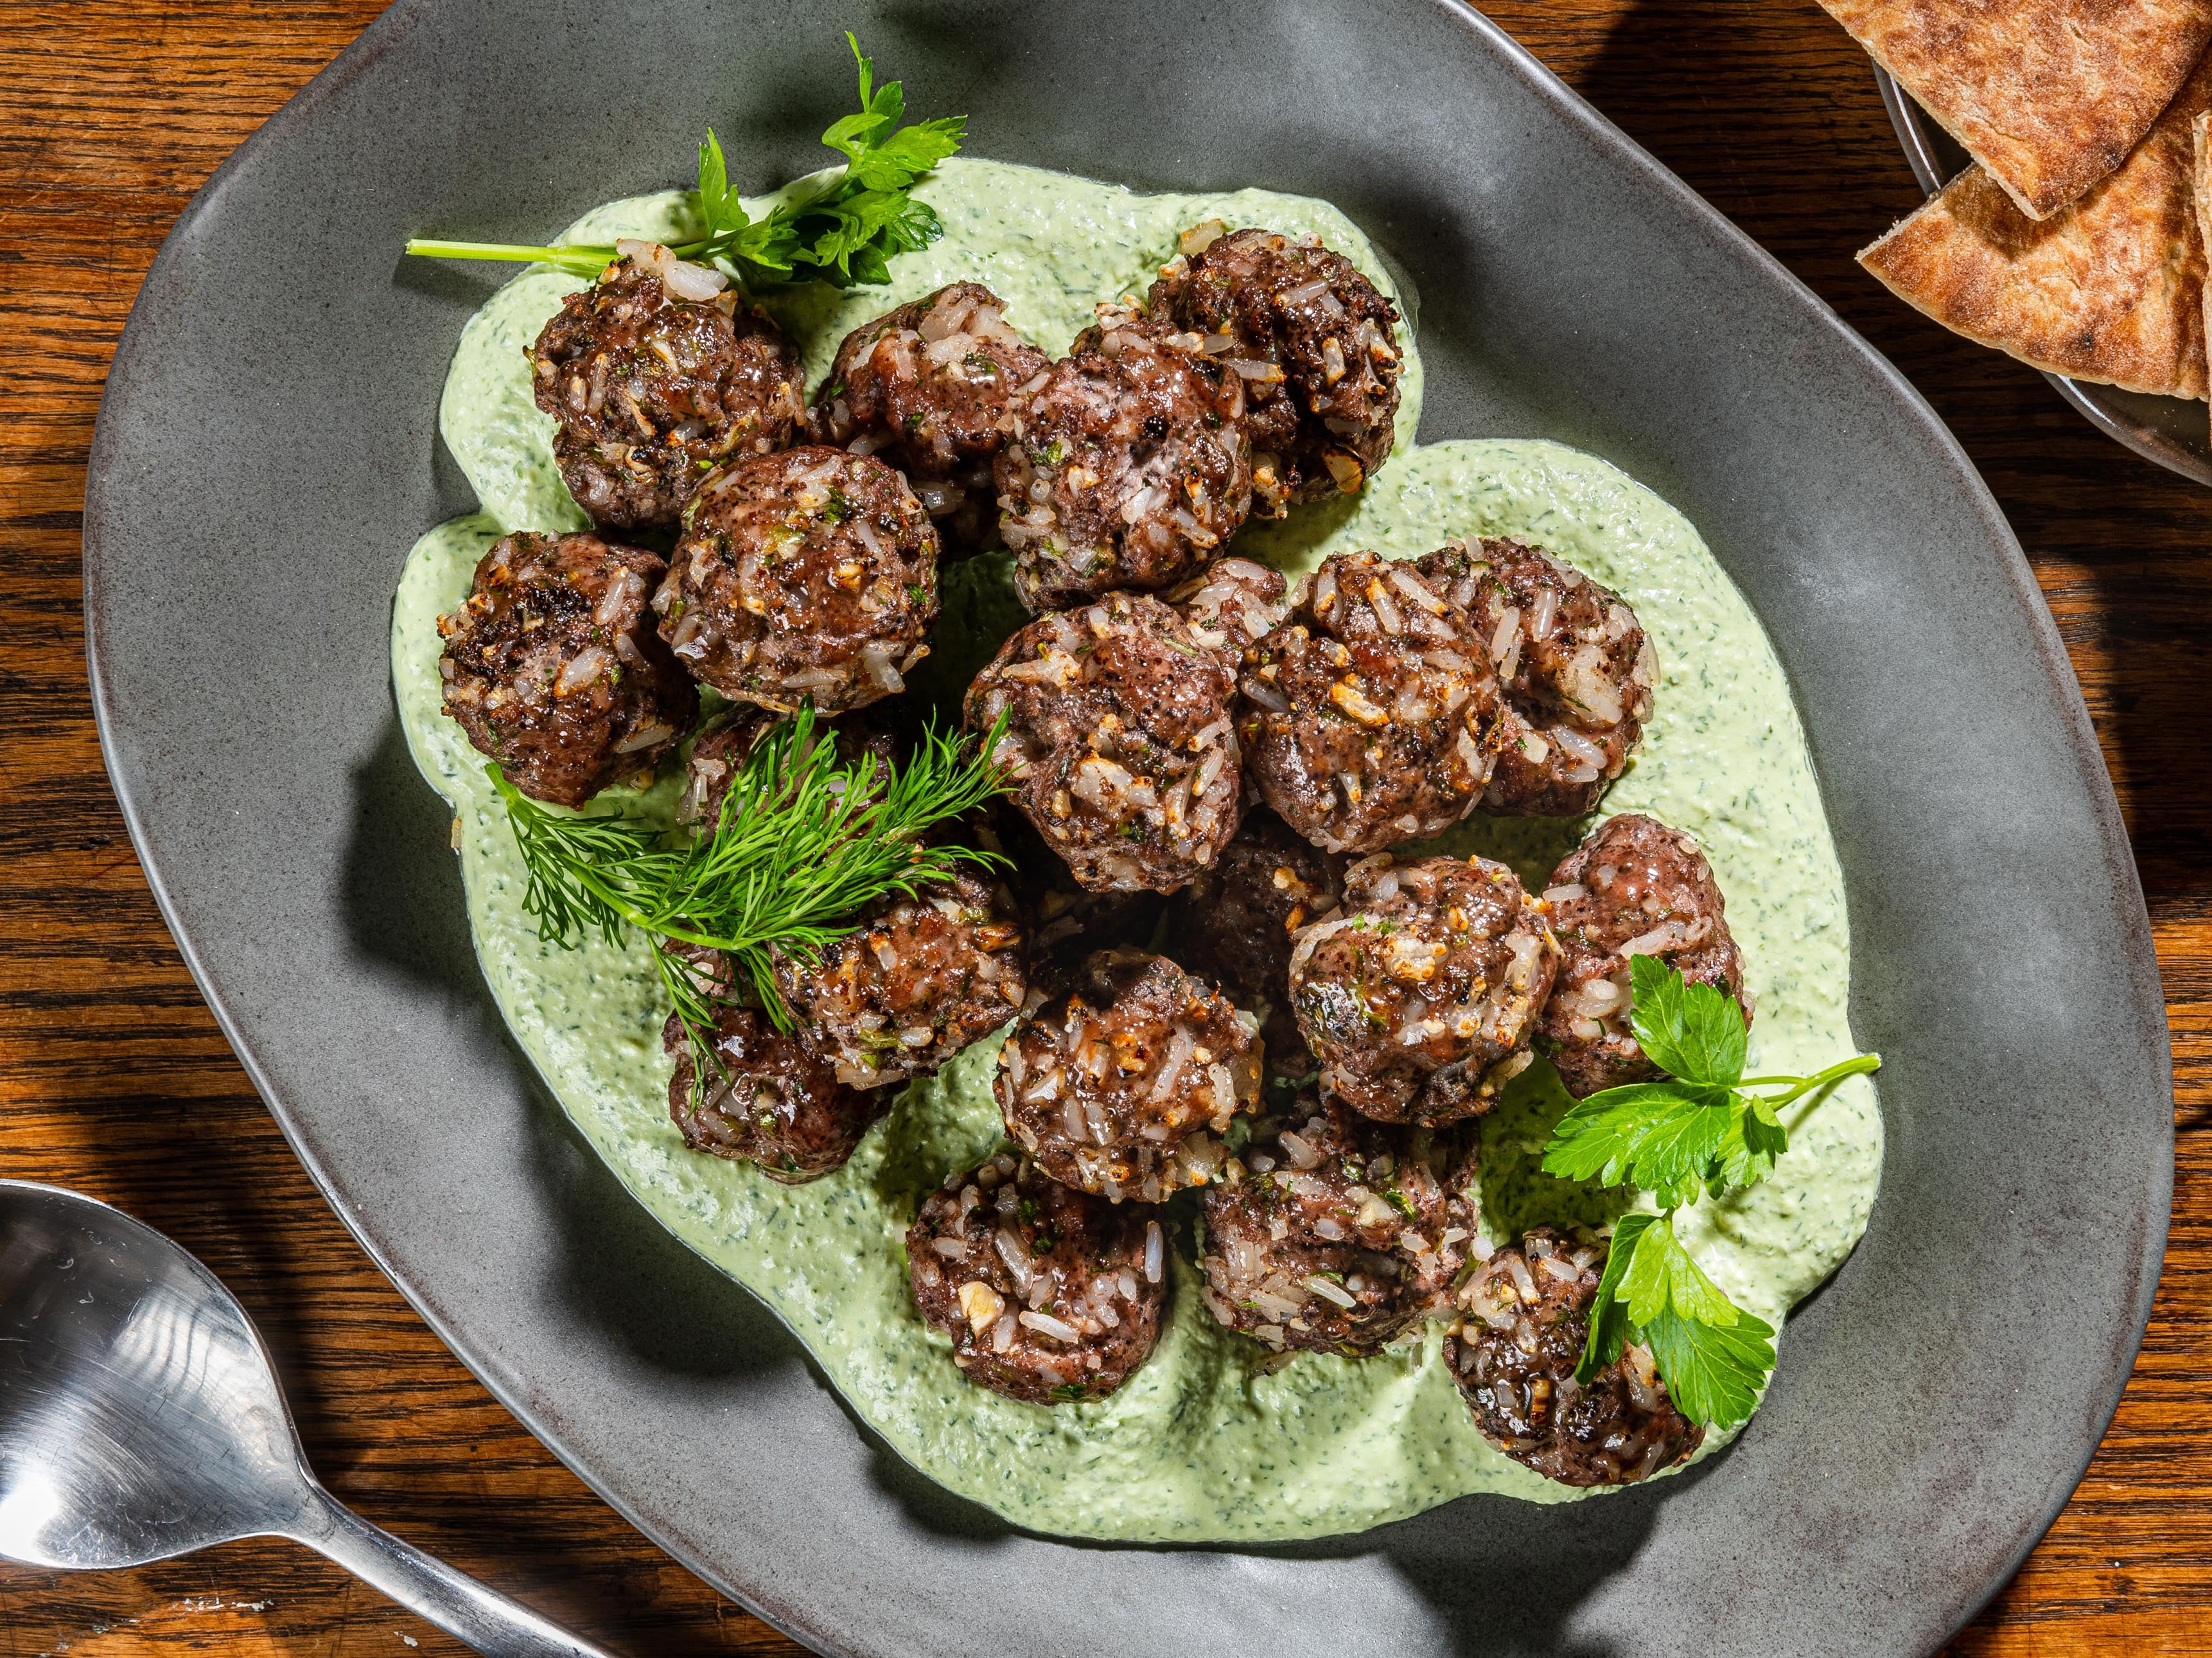 Fresh, tender herbs are central to these lamb meatballs